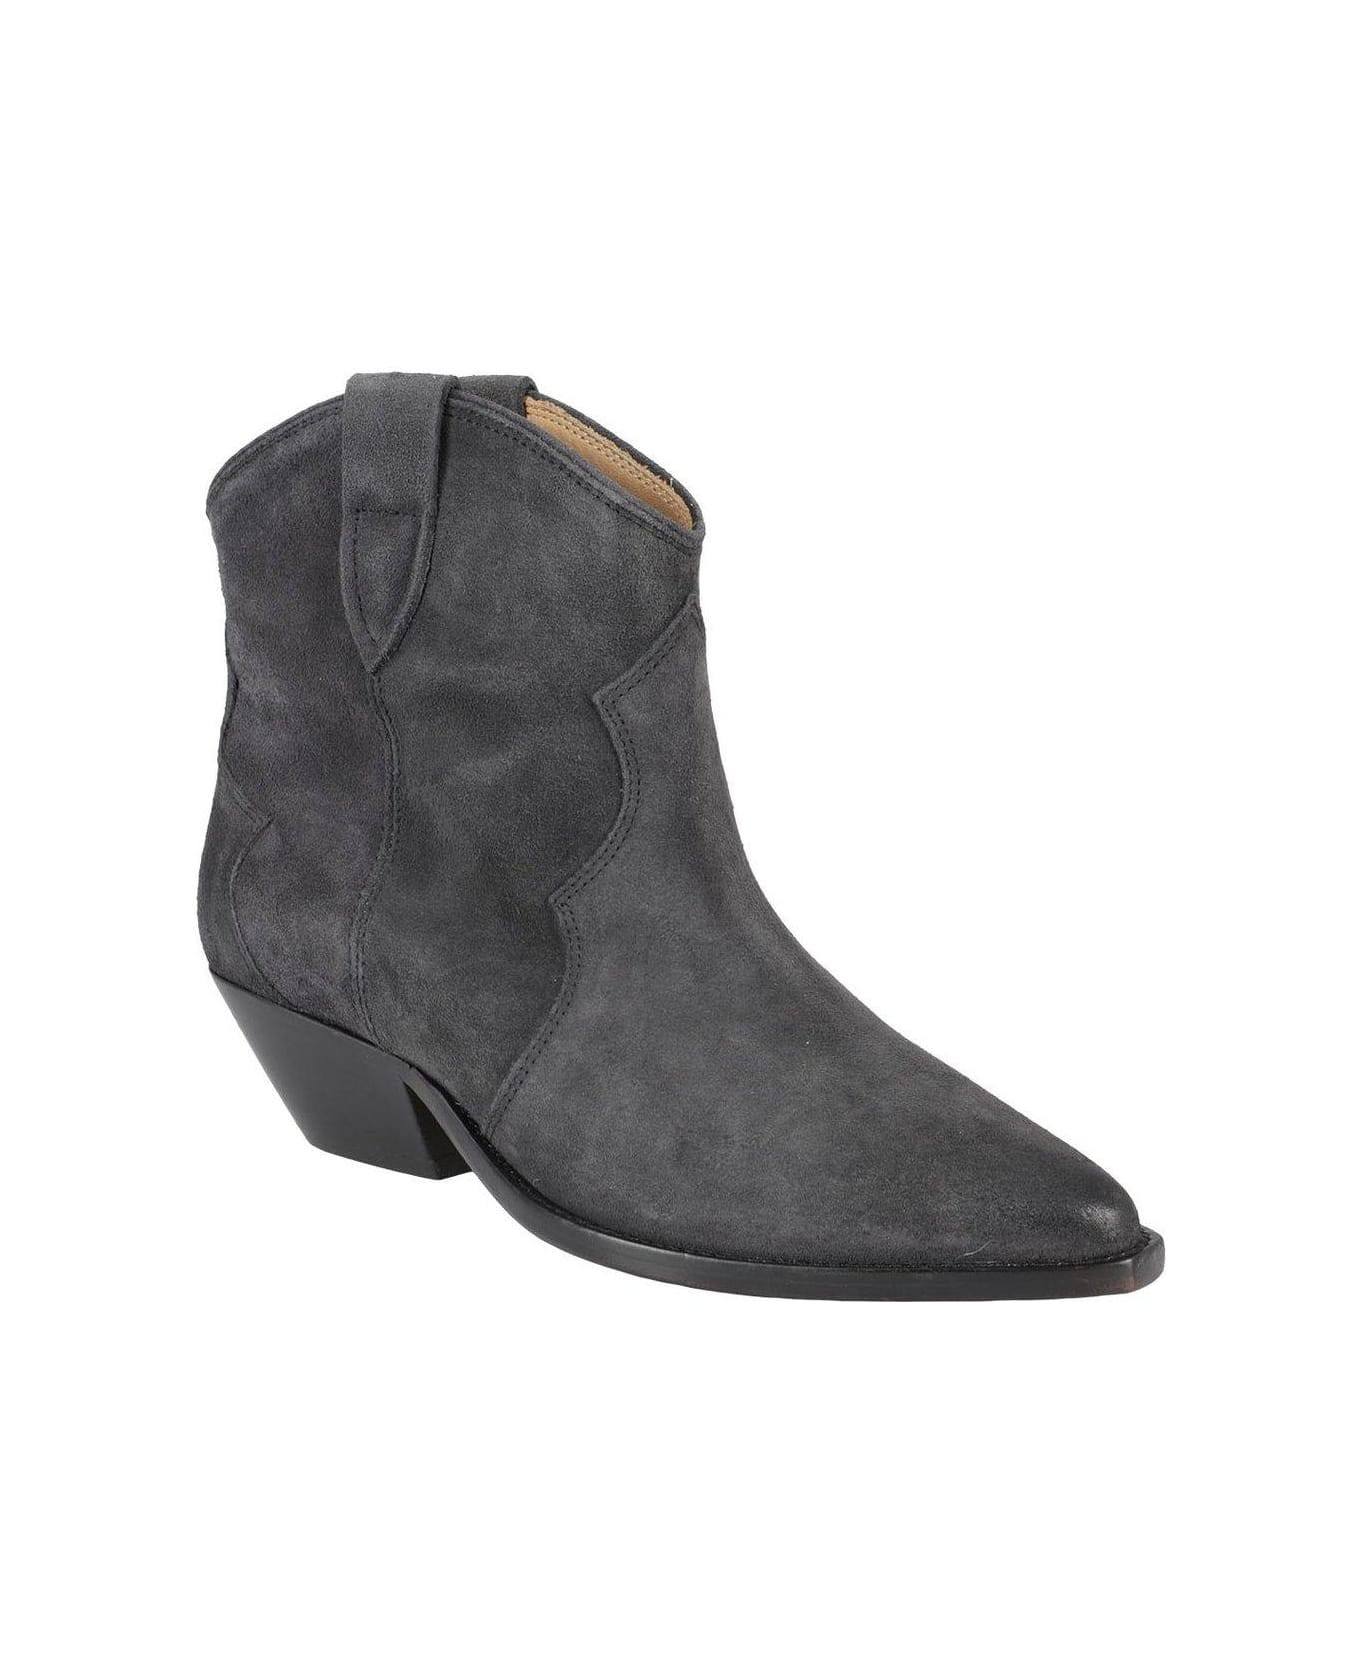 Isabel Marant Pointed Toe Ankle Boots - Black